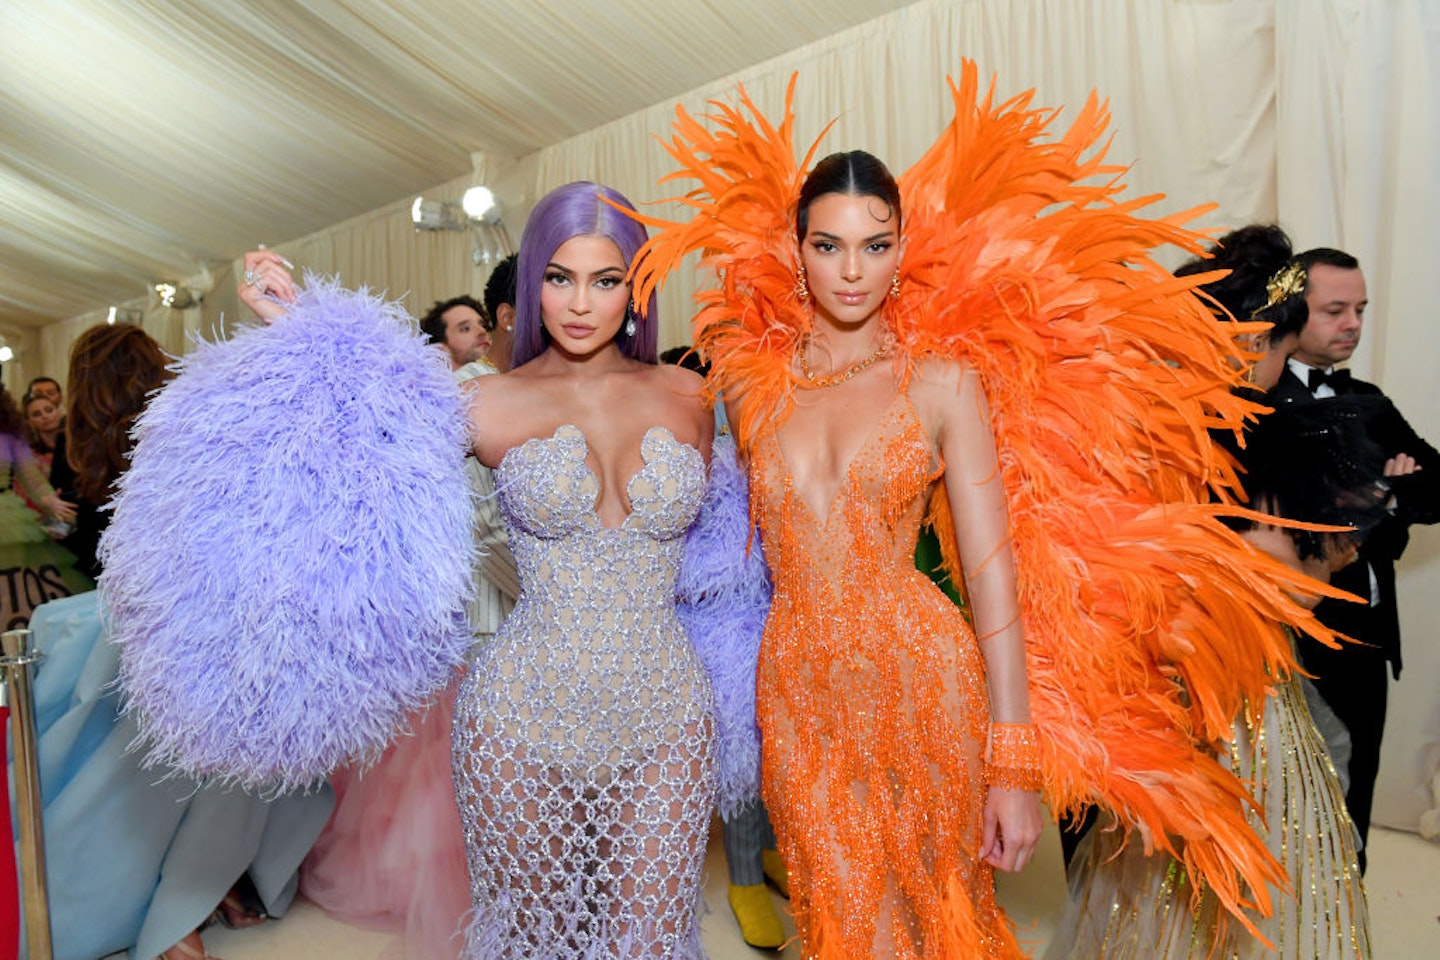 Kendall and Kylie Jenner at the Met Gala in 2019